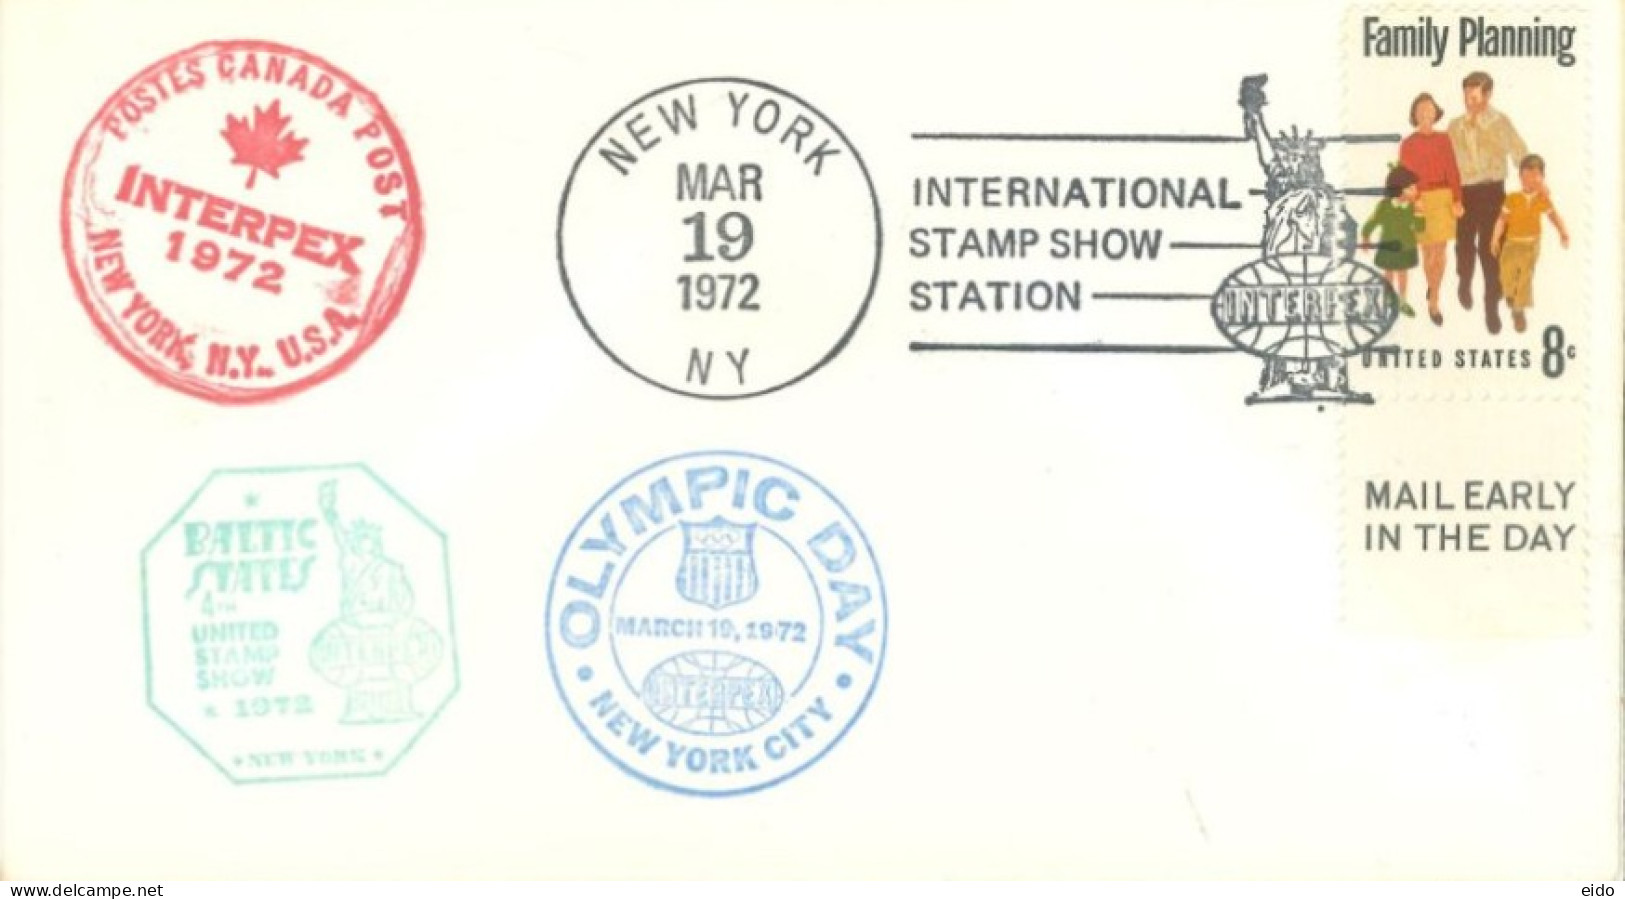 U.S.A.. -1968 -  OFFICIAL STAMP COVER OF FAMILY PLANNING AT INTERNATIONAL STAMP SHOW STATION, NEW YORK - Brieven En Documenten